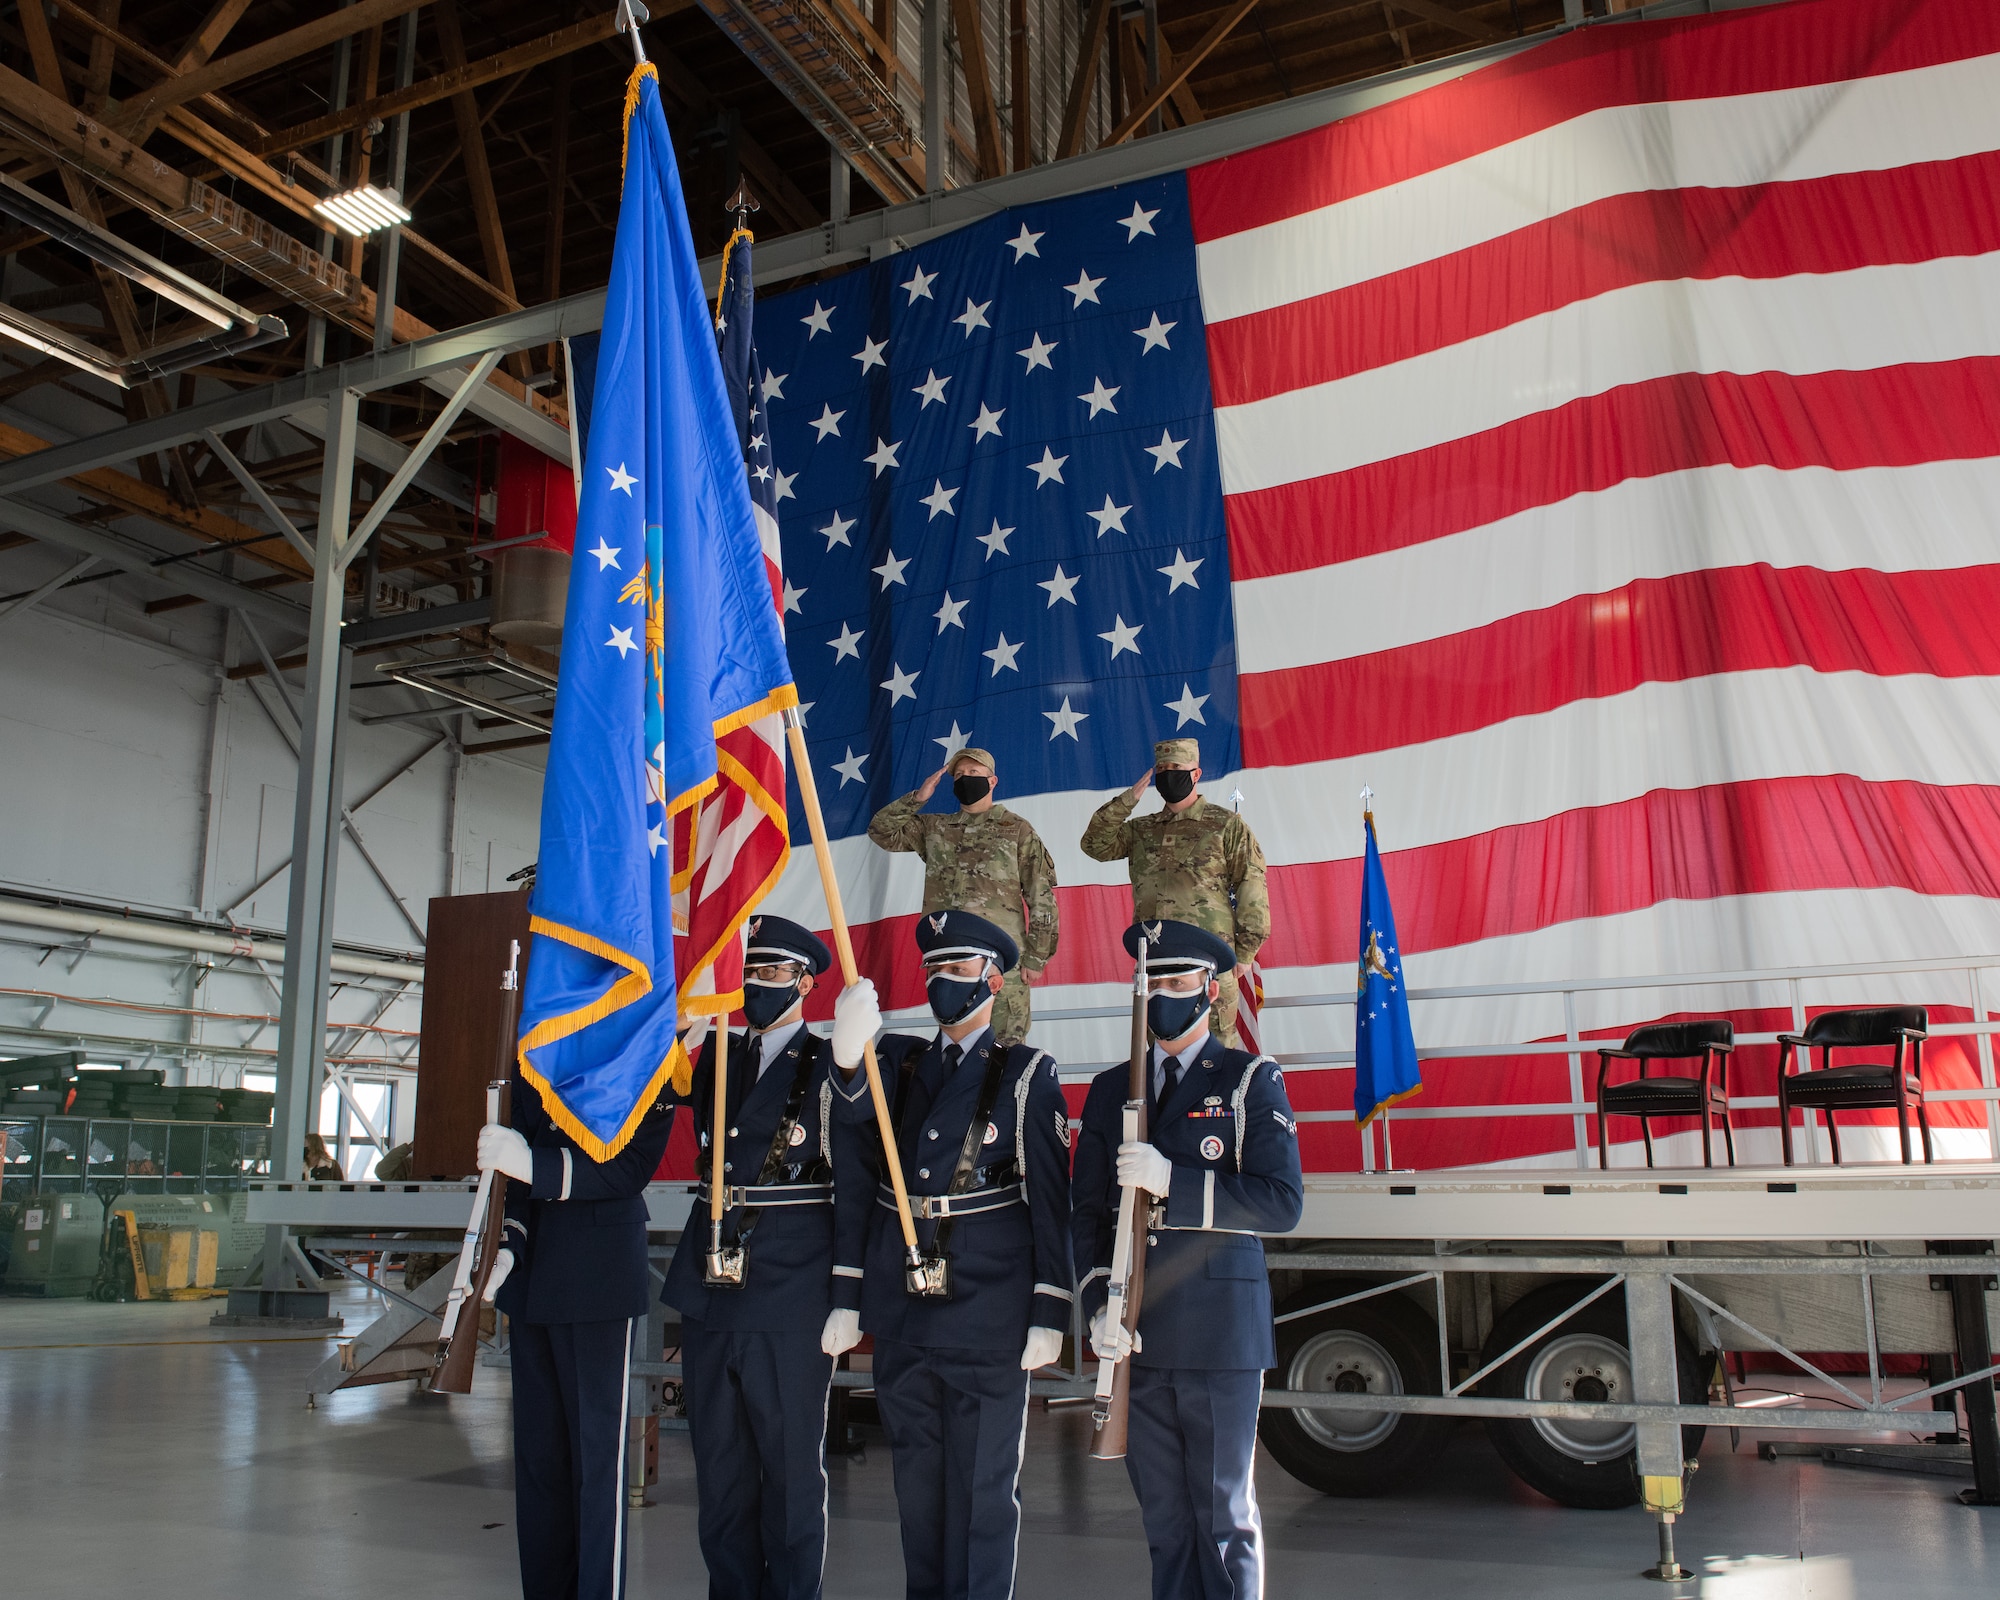 Col. DiVittorio and Maj. Griffin hold a salute behind the U.S. Air Force Color Guard during the playing of the United States National Anthem